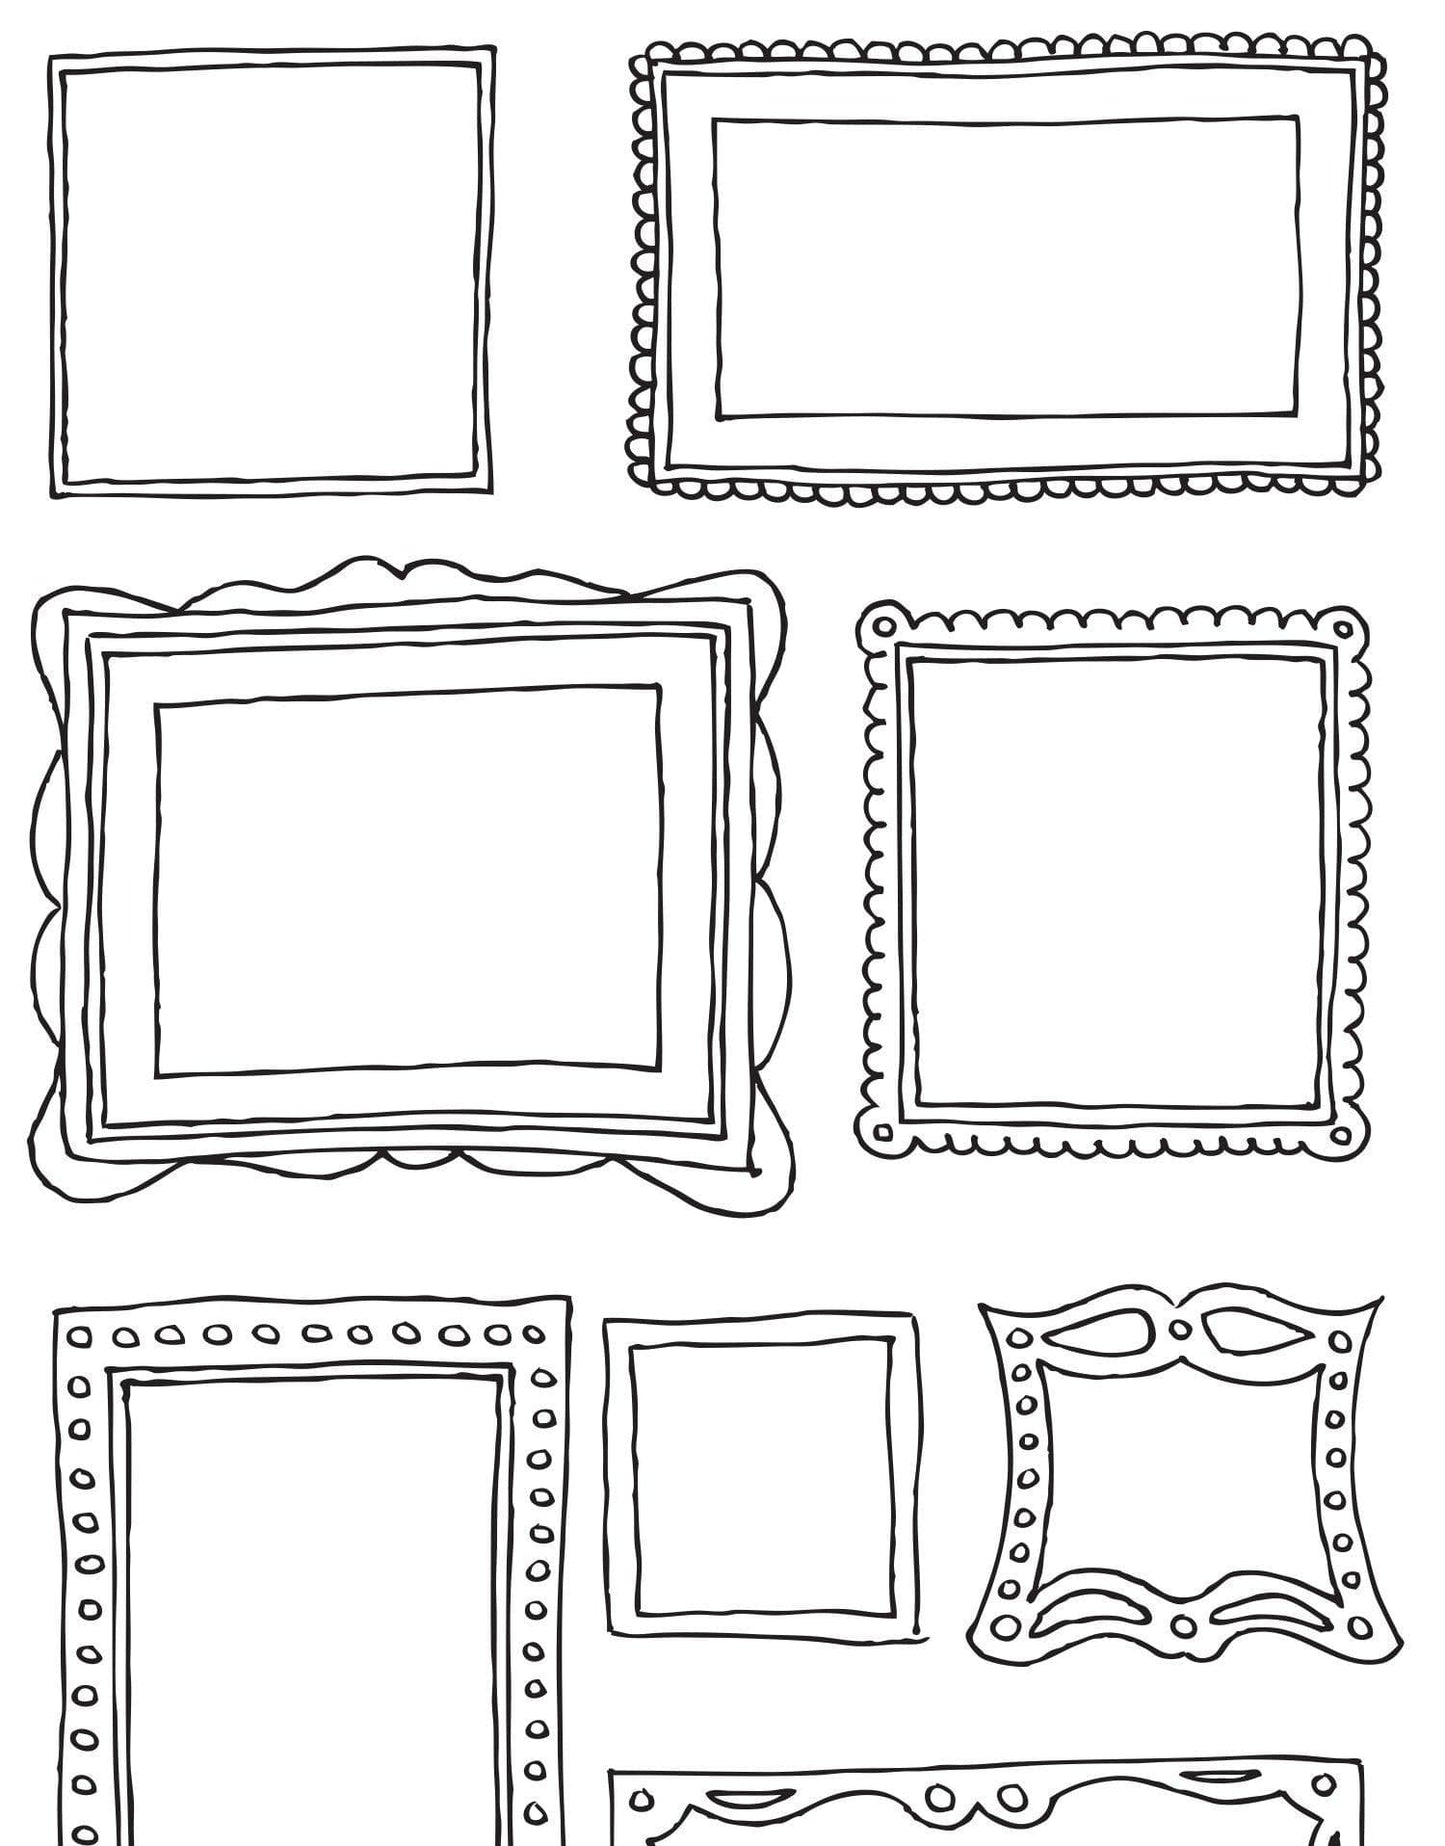 21 Various Picture Frames Vinyl Wall Decal Sticker #6055